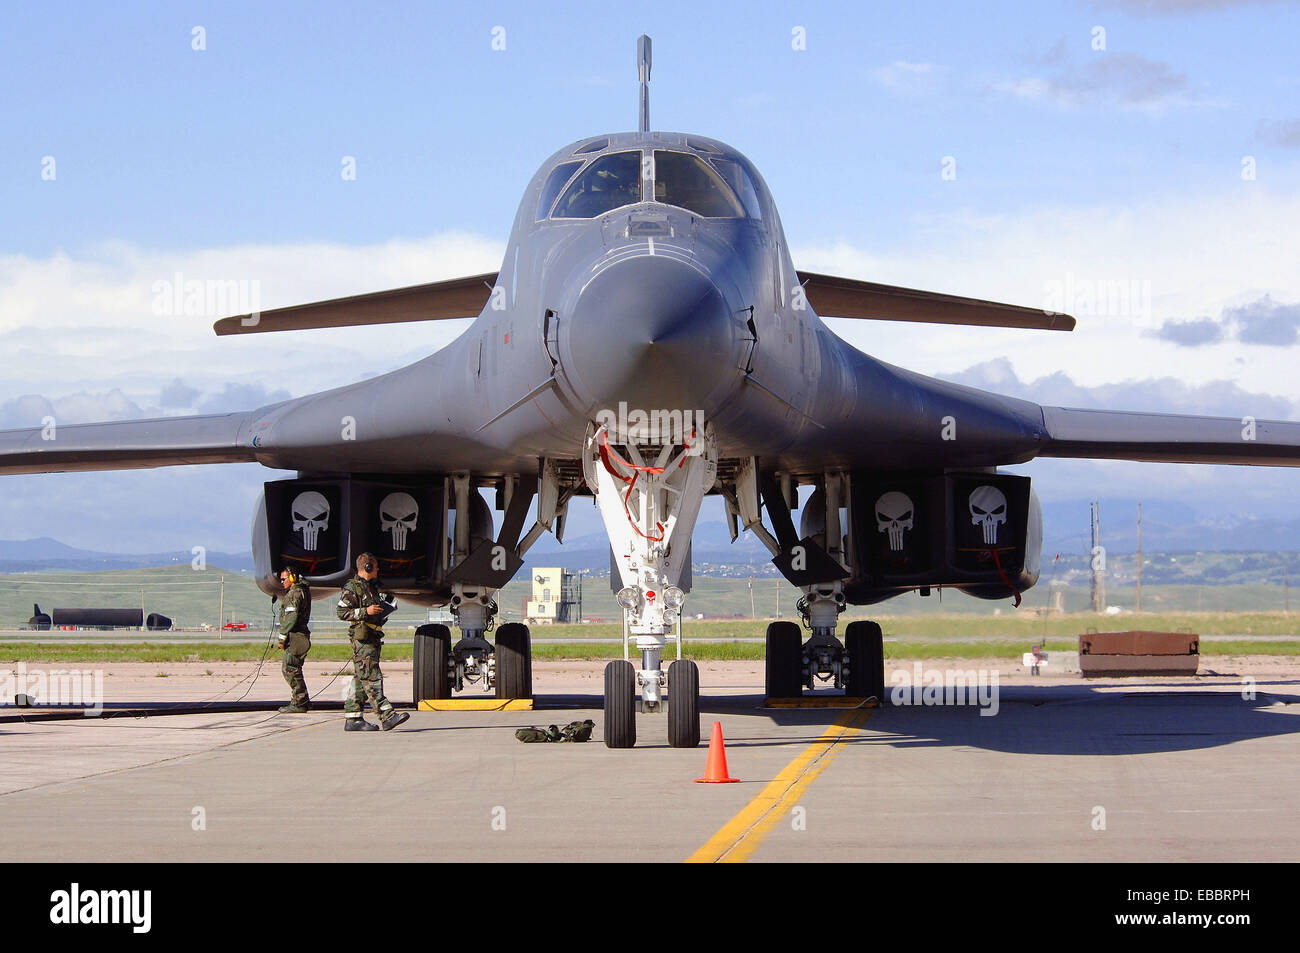 A 37th Bomb Squadron B-1b Lancer awaits pre-flight inspections at Ellsworth Air Force Base, S.D., May 23, 2006. Ellsworth is Stock Photo